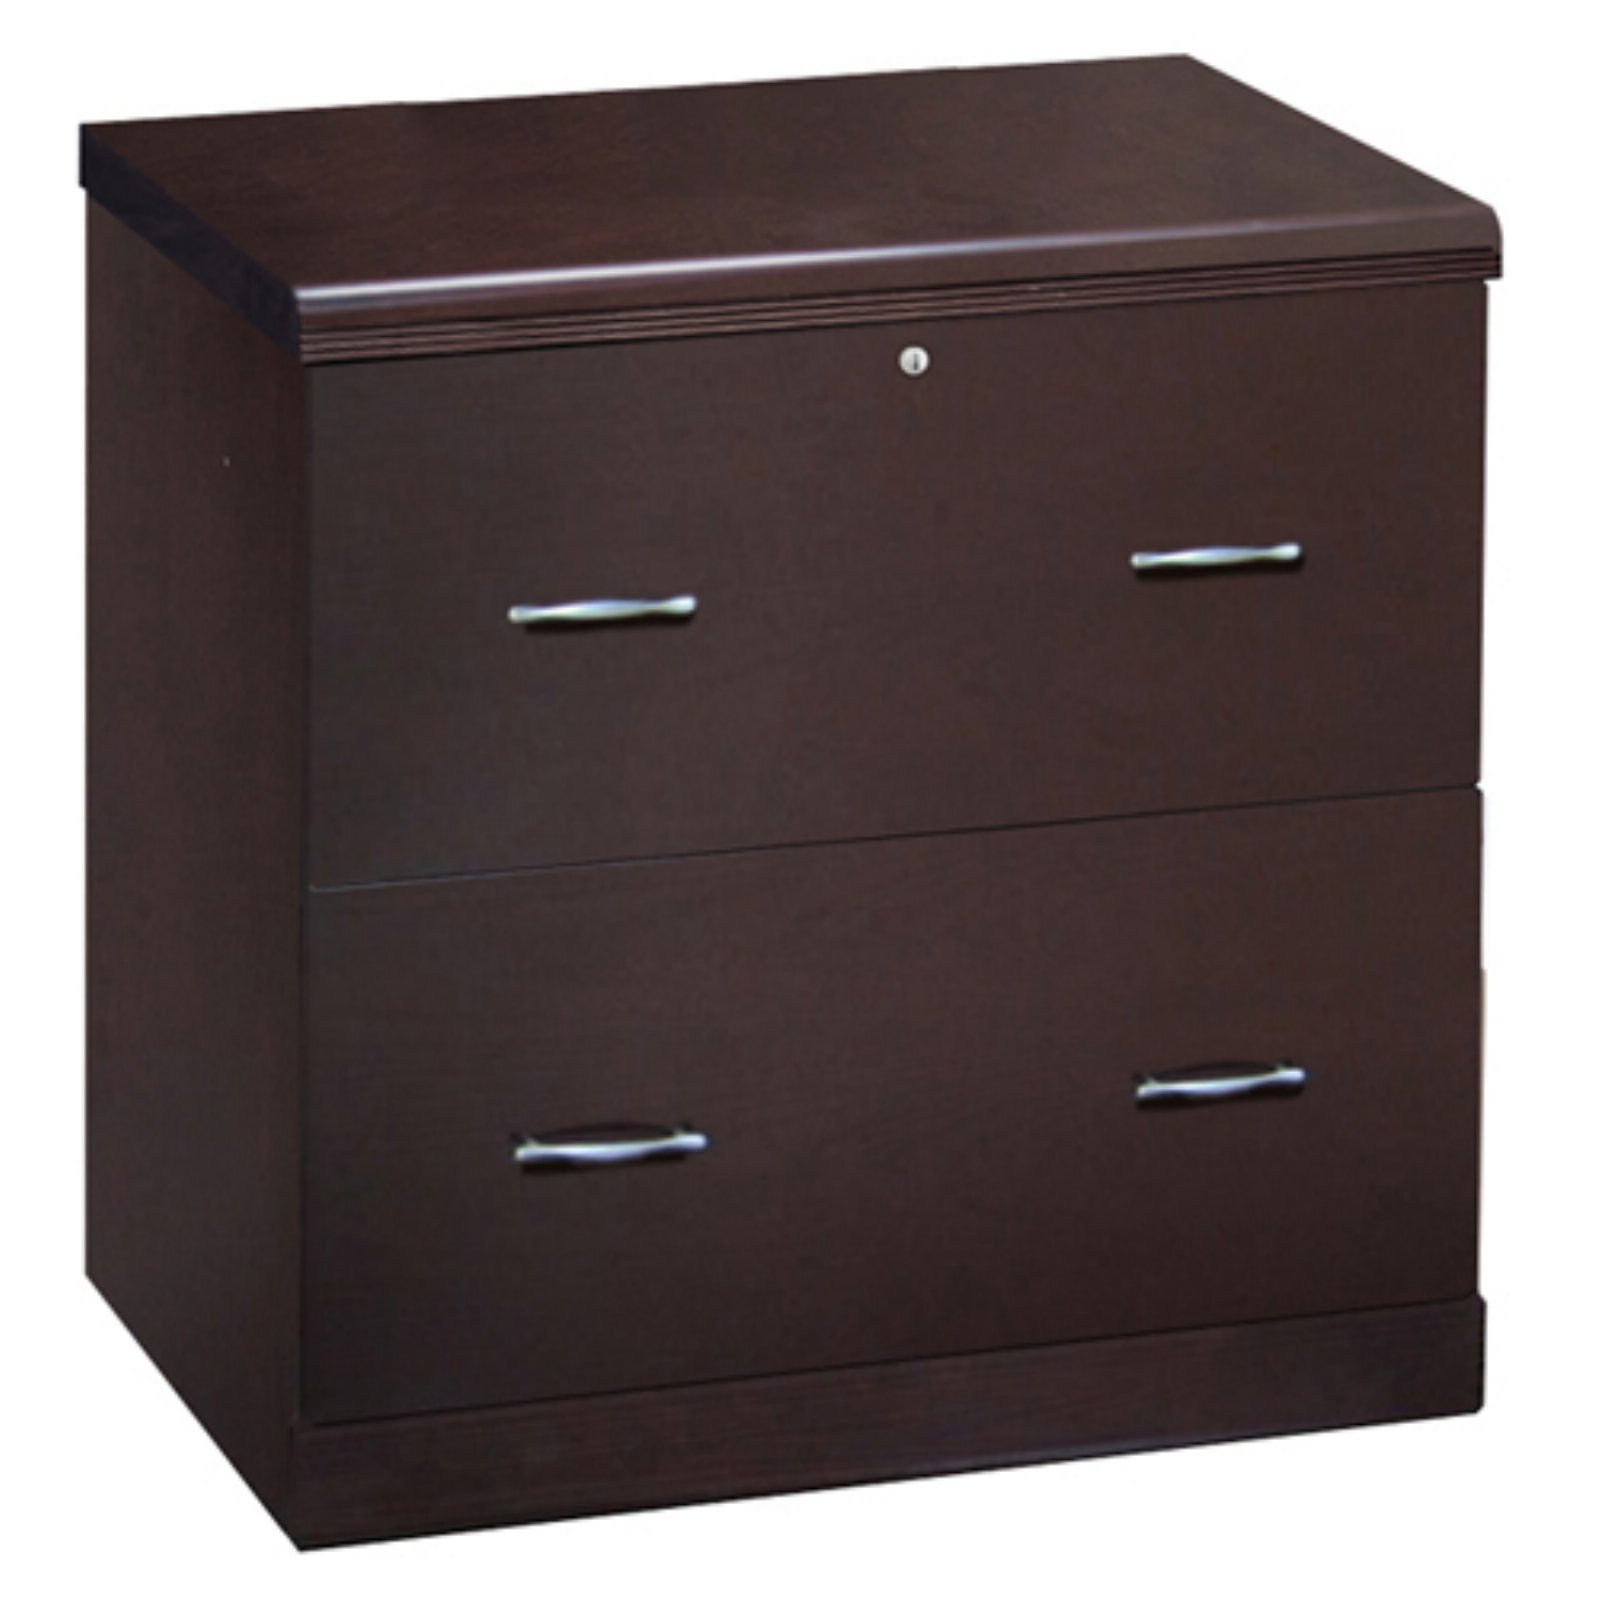 2 Drawer Lateral Wood Lockable Filing Cabinet Espresso Walmart throughout proportions 1600 X 1600